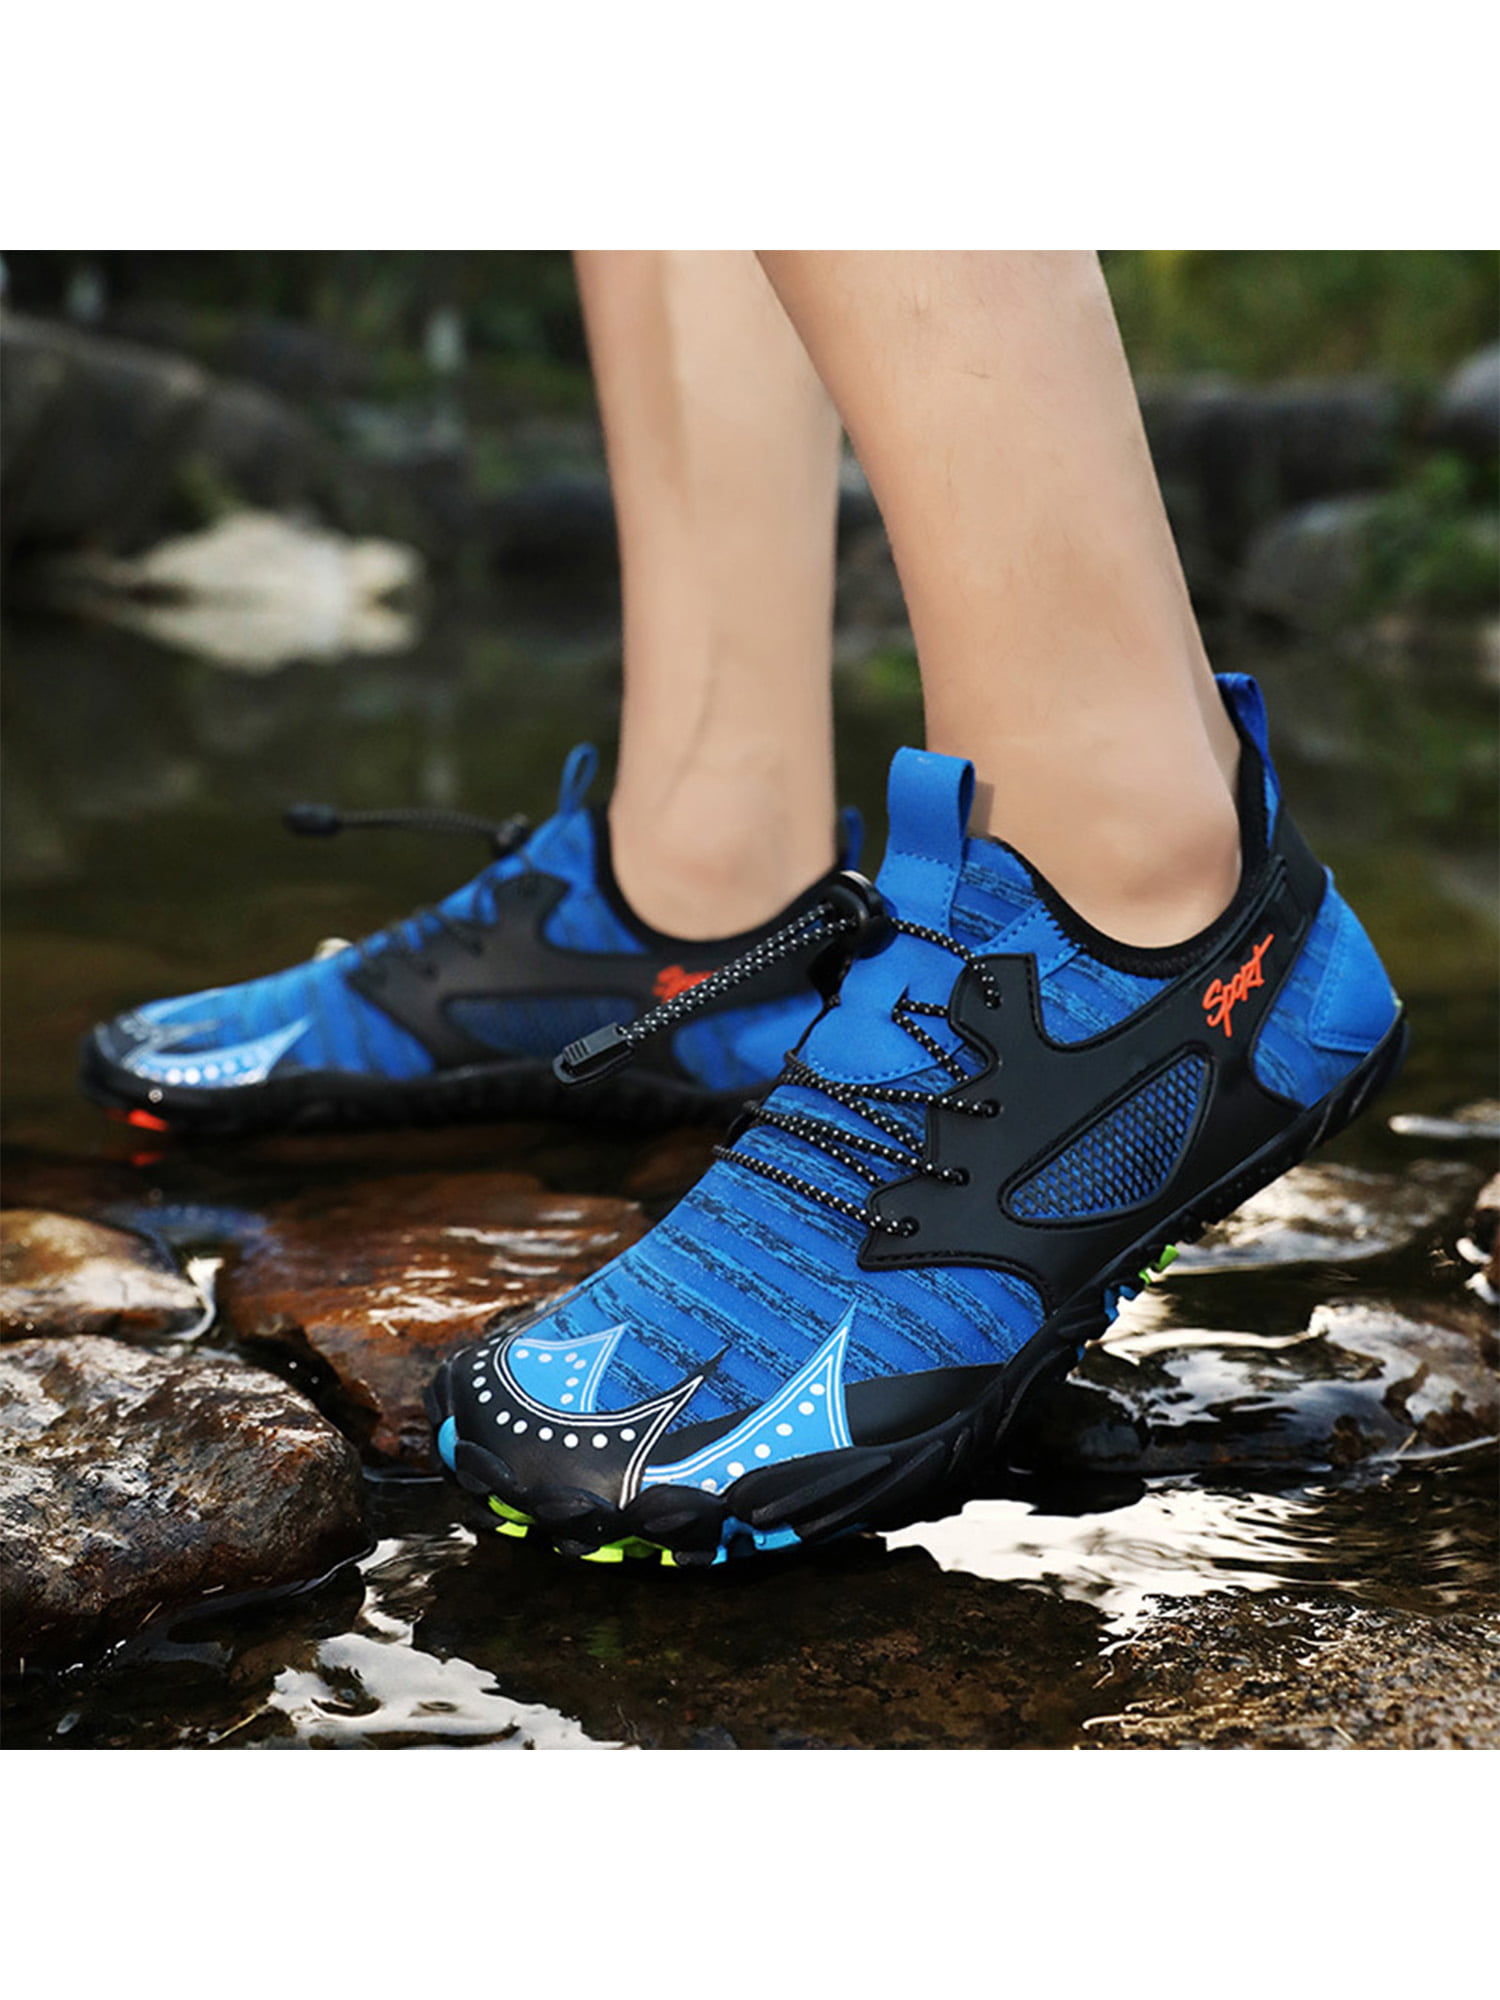 Mens Womens Water Aqua Shoes Summer Athletic Outdoor Sports Barefoot Diving Surf